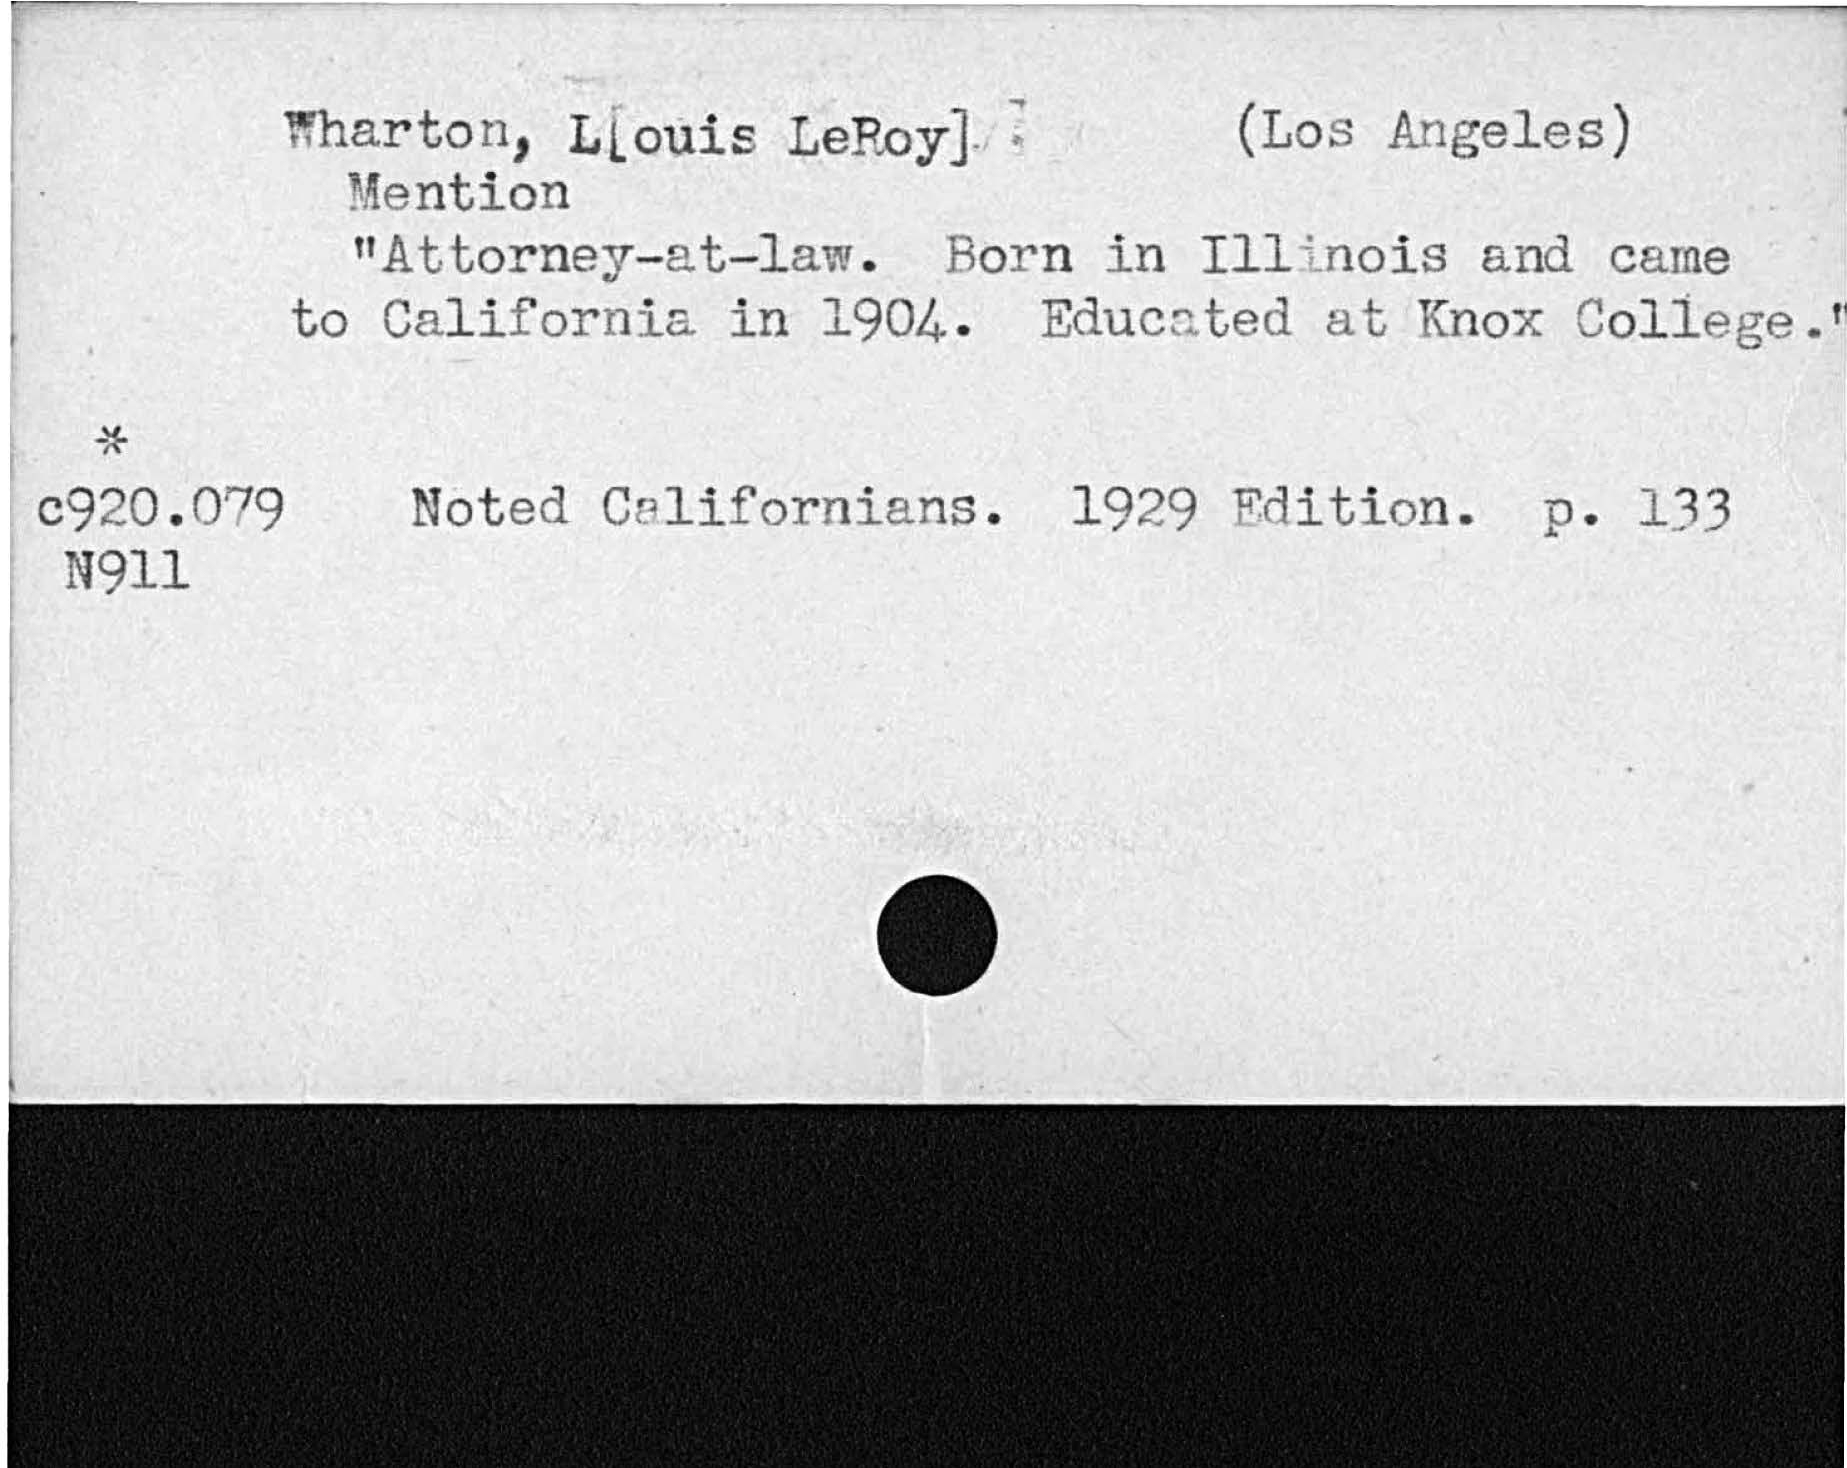 Wharton, Louis LeRoy. Los AngelesmentionAttorney- at- law. Born in Illinois and carneto California in 1904 Educated at Knox College.Noted Californians 1929 Edition. p. 133     N9ll  c920. 0179